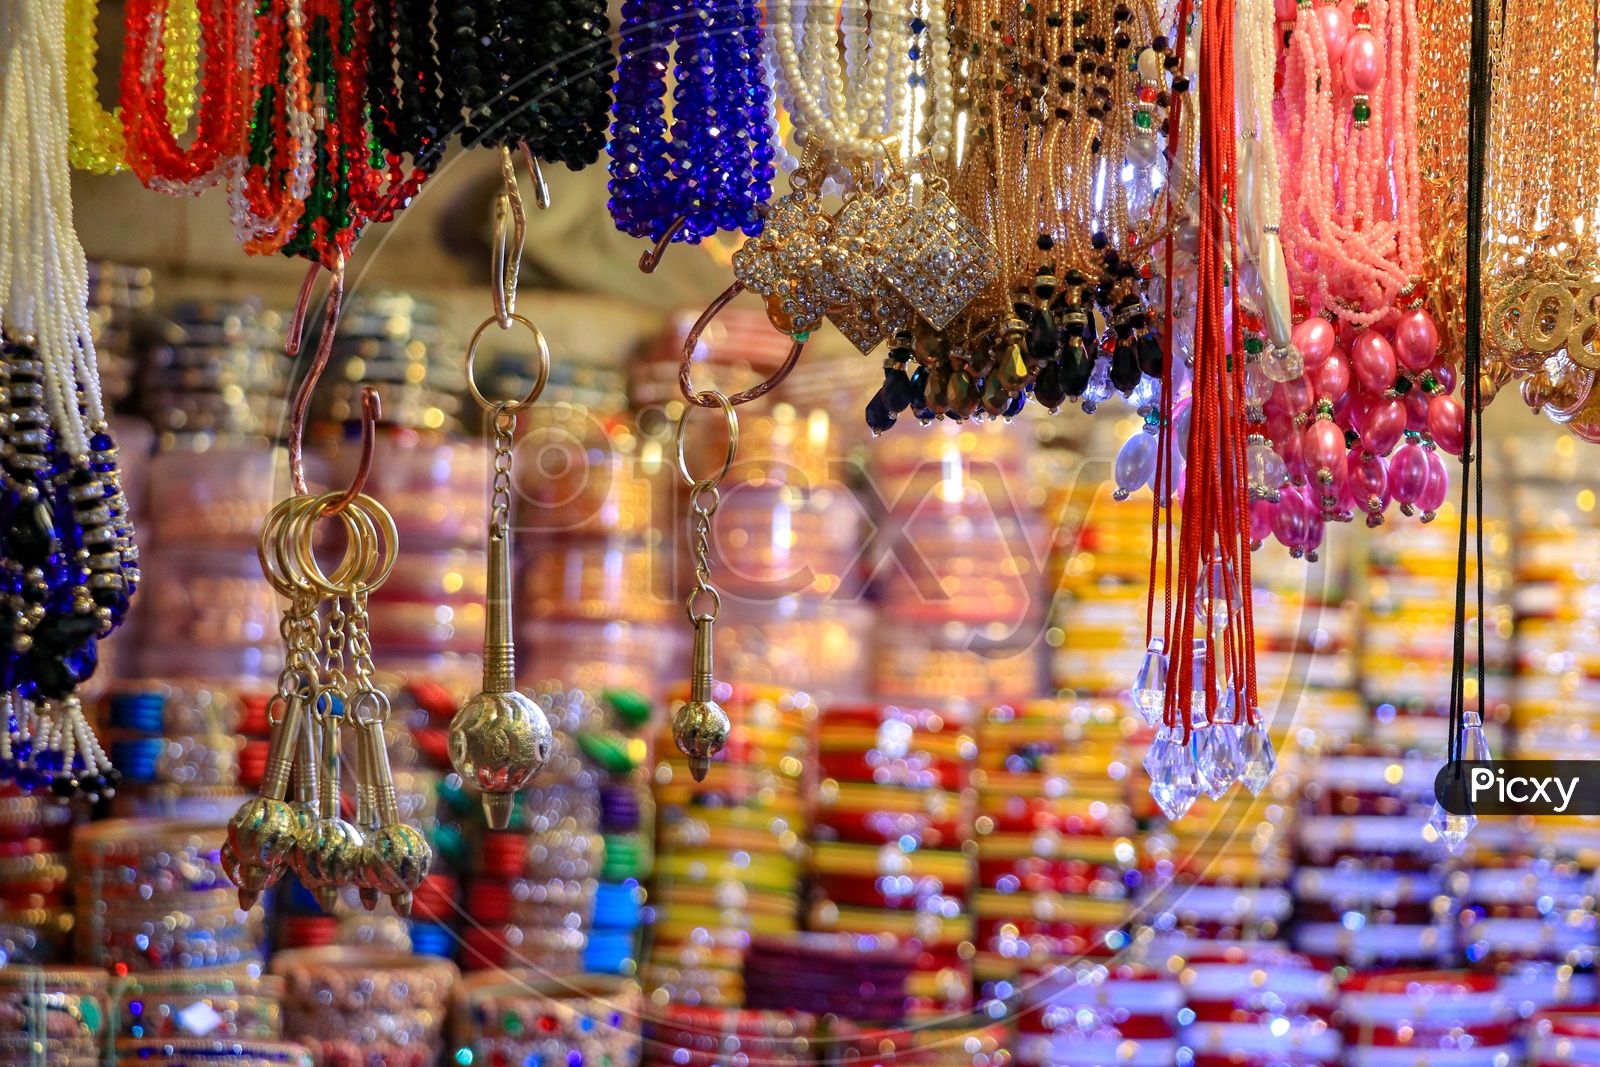 Display of colorful beaded chains and lockets